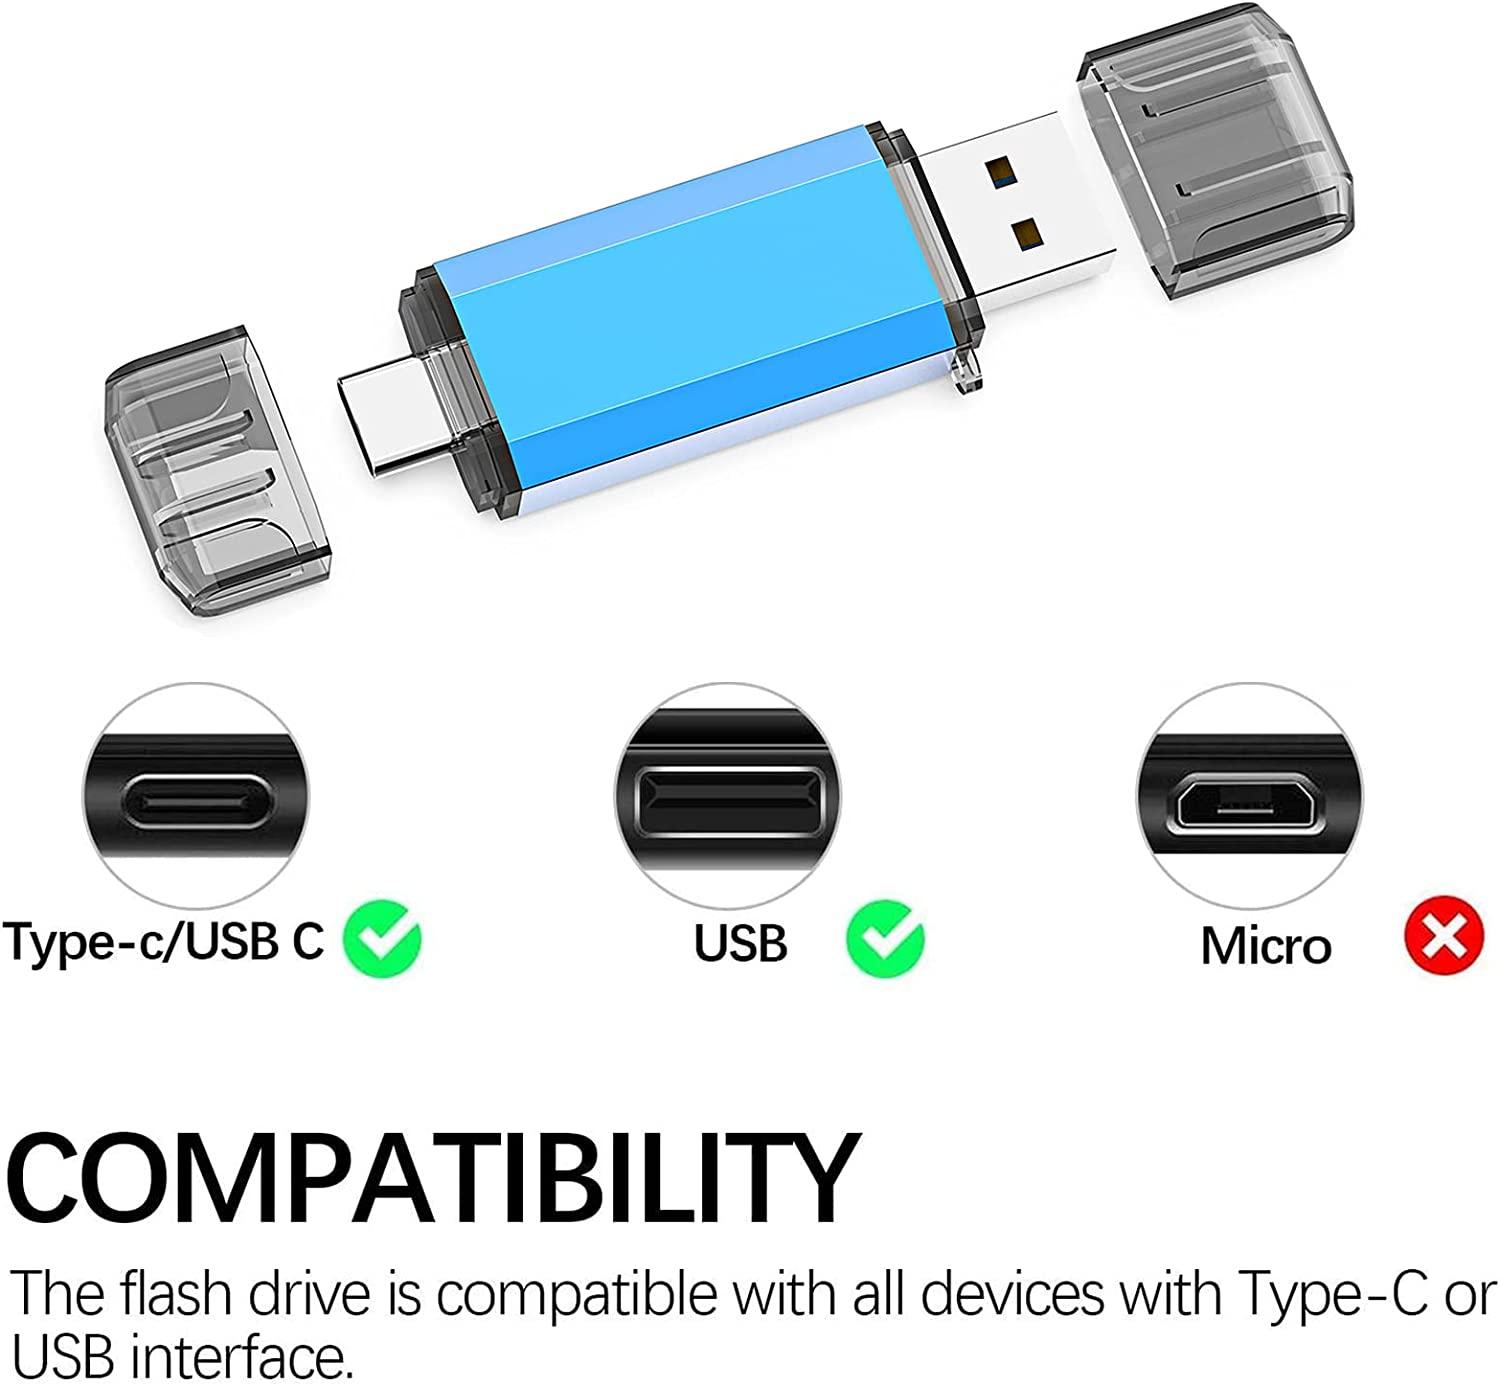 64GB USB C Flash Drive, 2-in-1 OTG USB 3.0 Thumb Drive, Dual USB Memory  Stick Pen Drive for Type-C Android Smartphones Tablets and New MacBook  Laptop